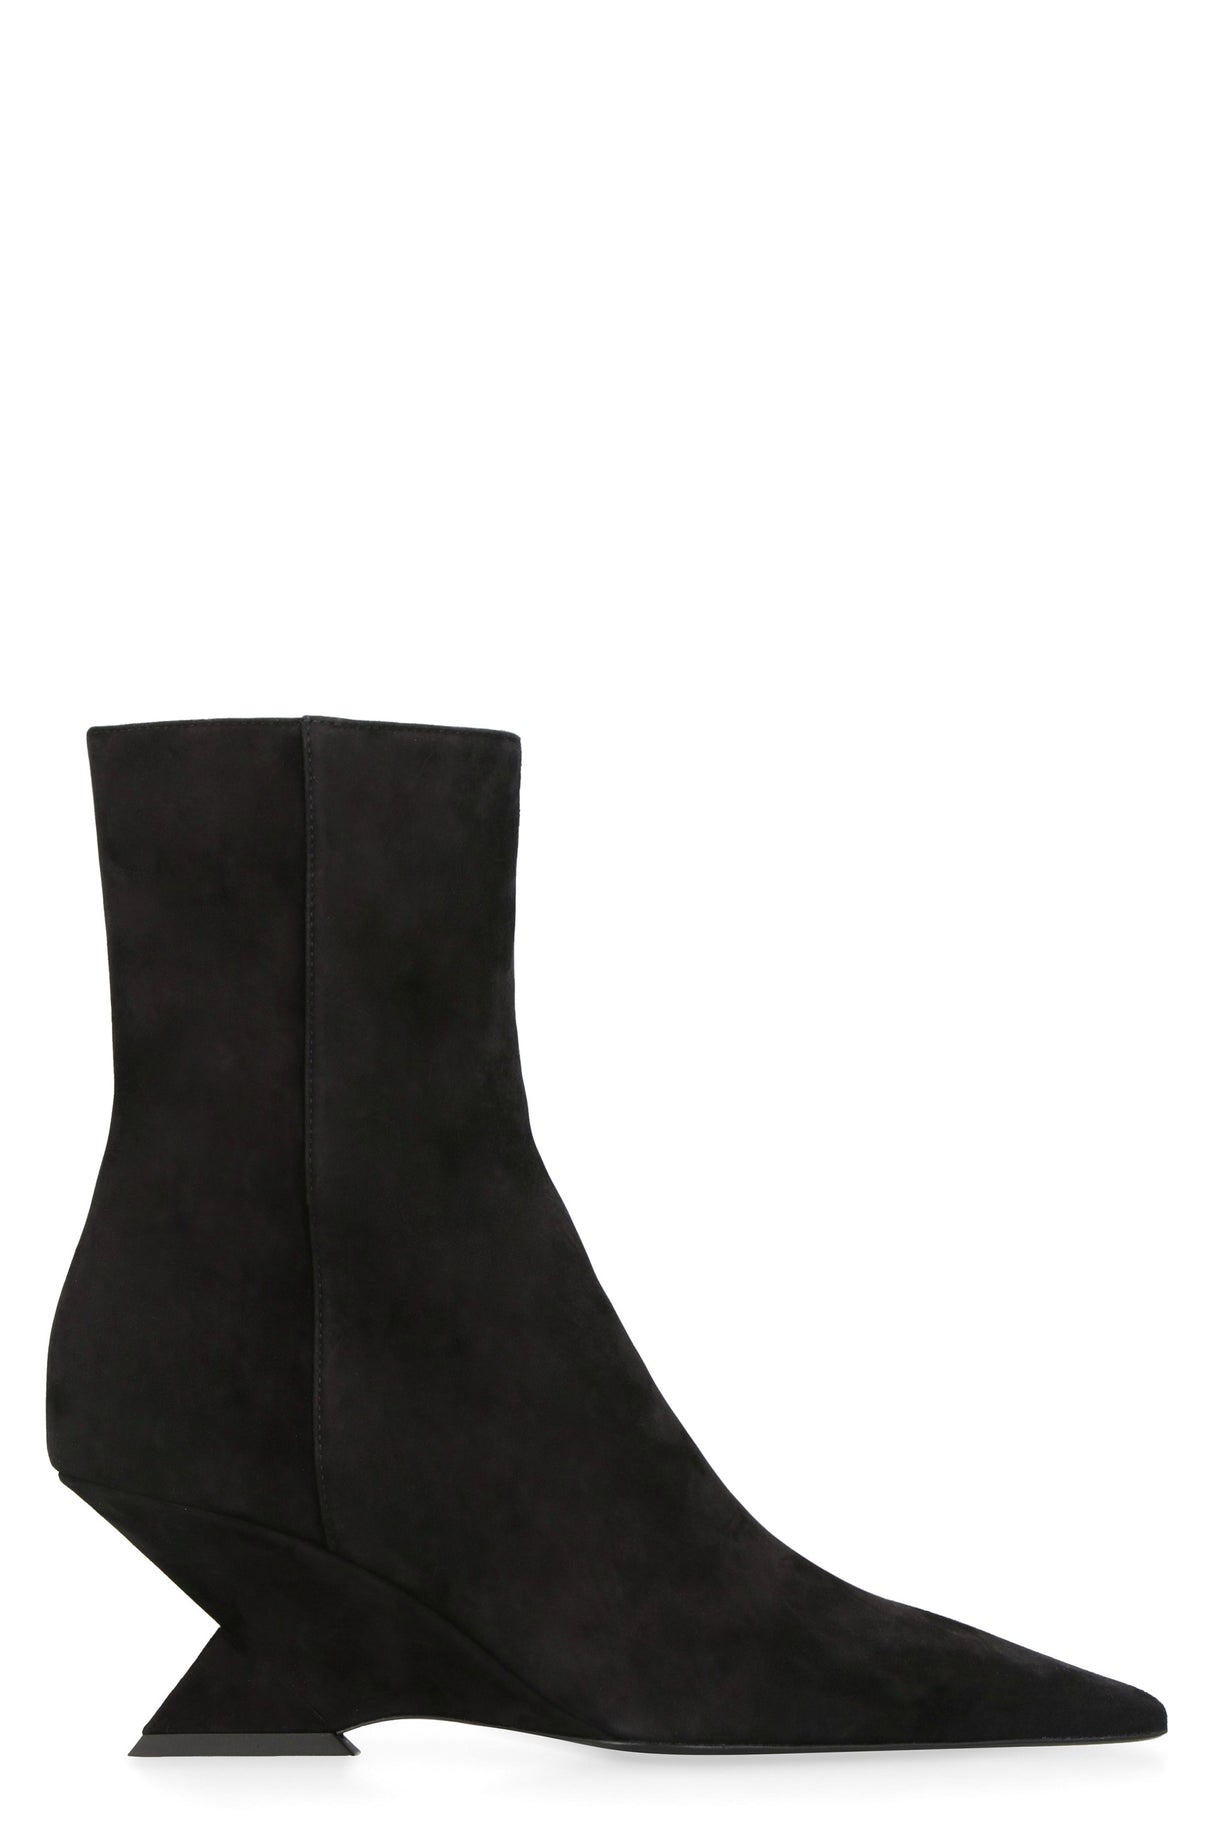 THE ATTICO Black Pointy Toe Ankle Boots with Pyramid Wedge for Women - FW23